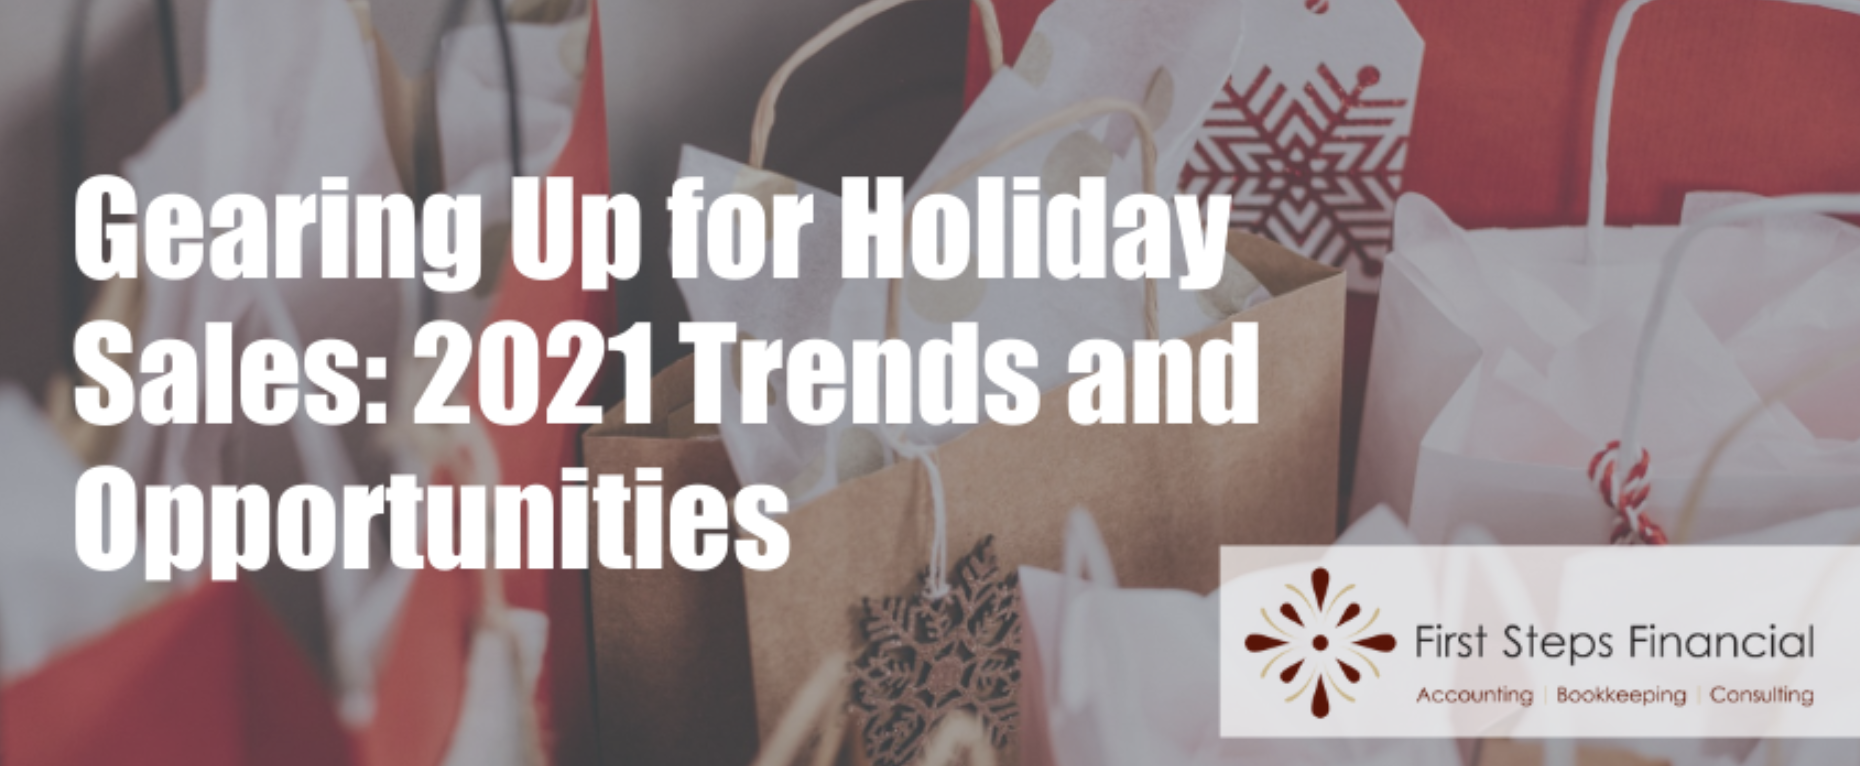 Gearing Up for Holiday Sales: 2021 Trends and Opportunities